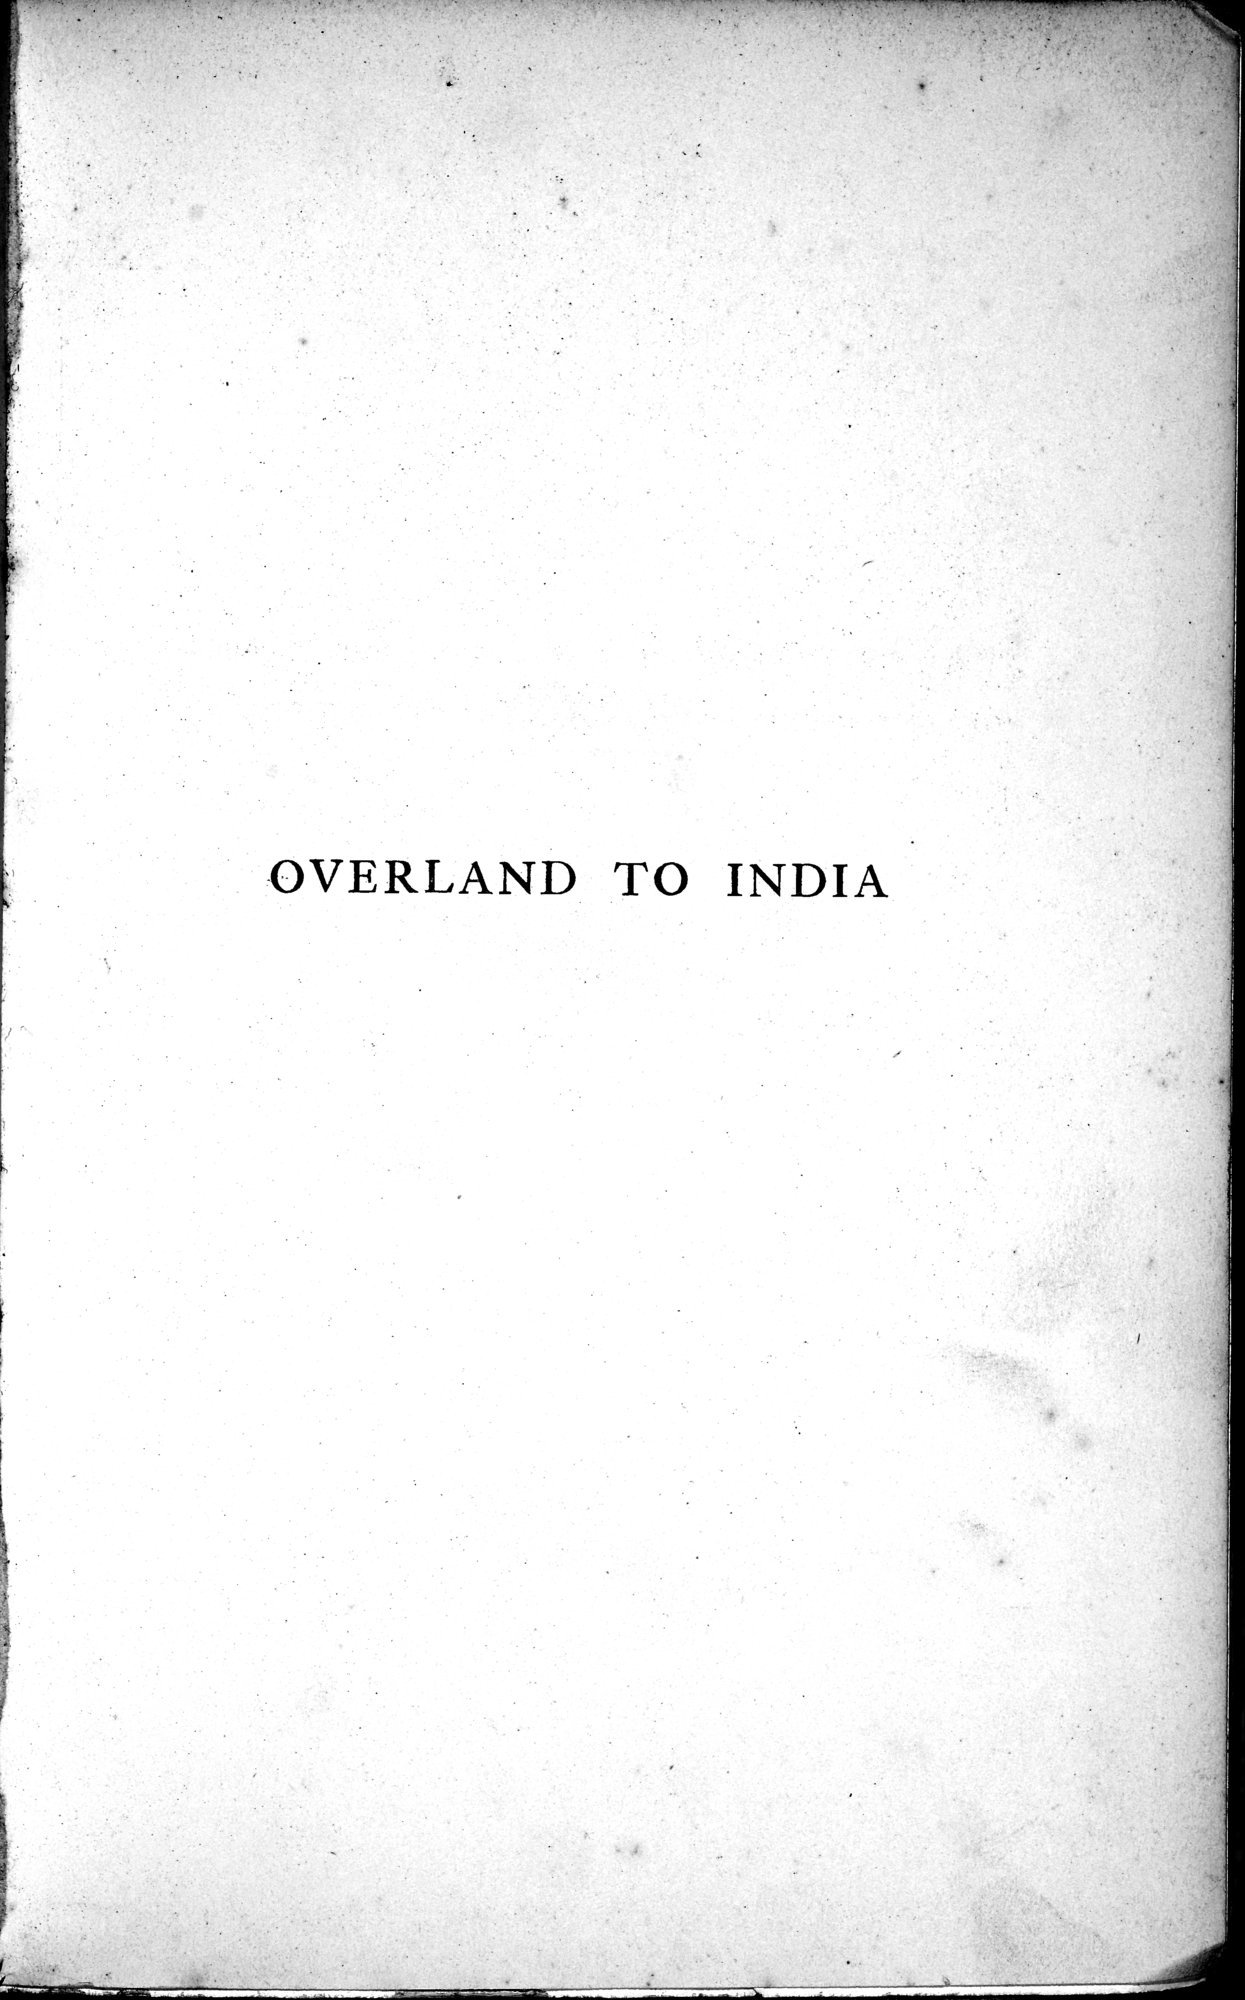 Overland to India : vol.1 / 5 ページ（白黒高解像度画像）